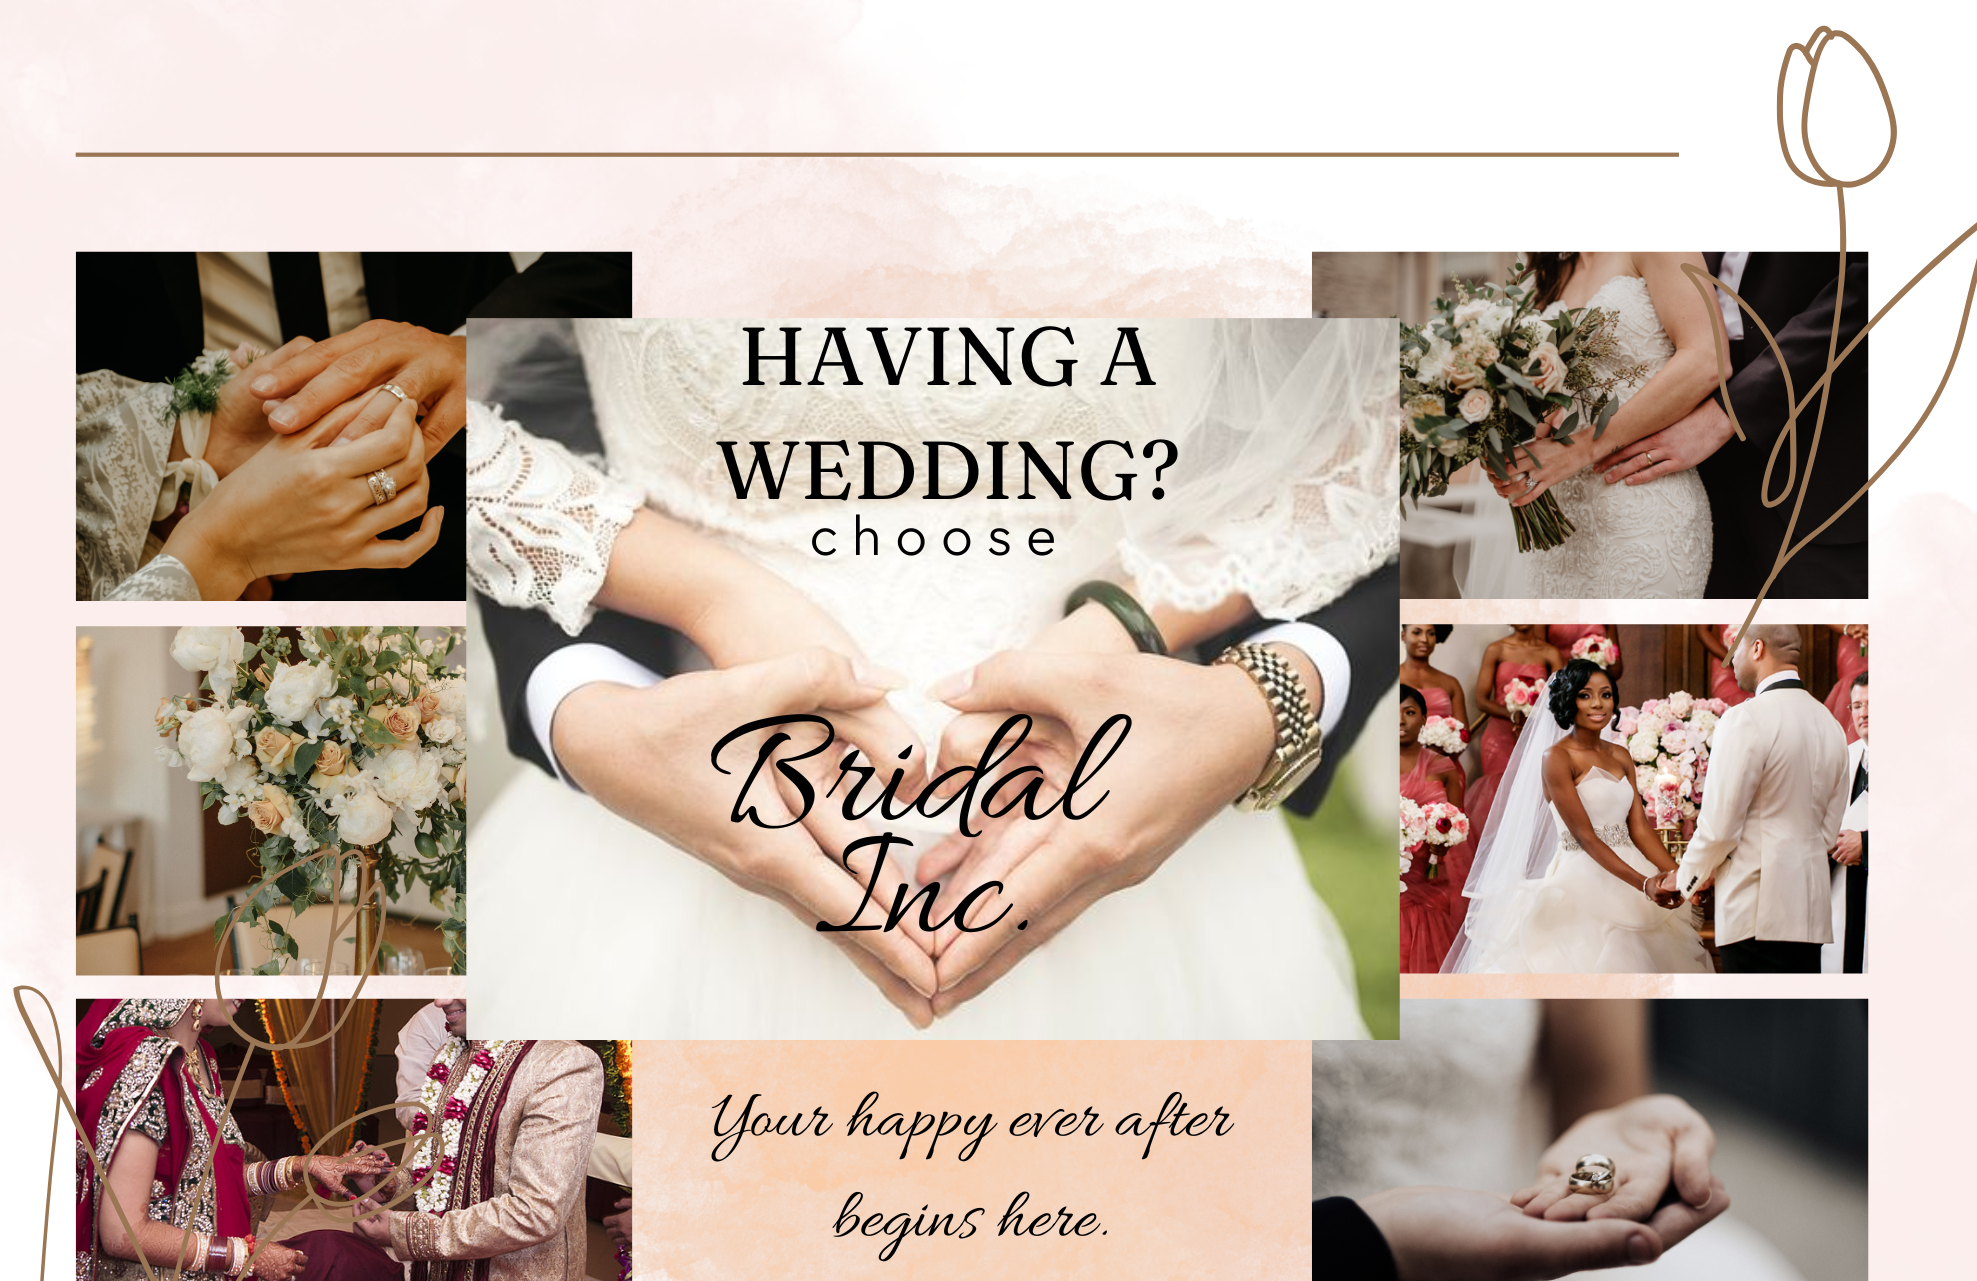 The Wedding Website of Afforable products and Customized orders